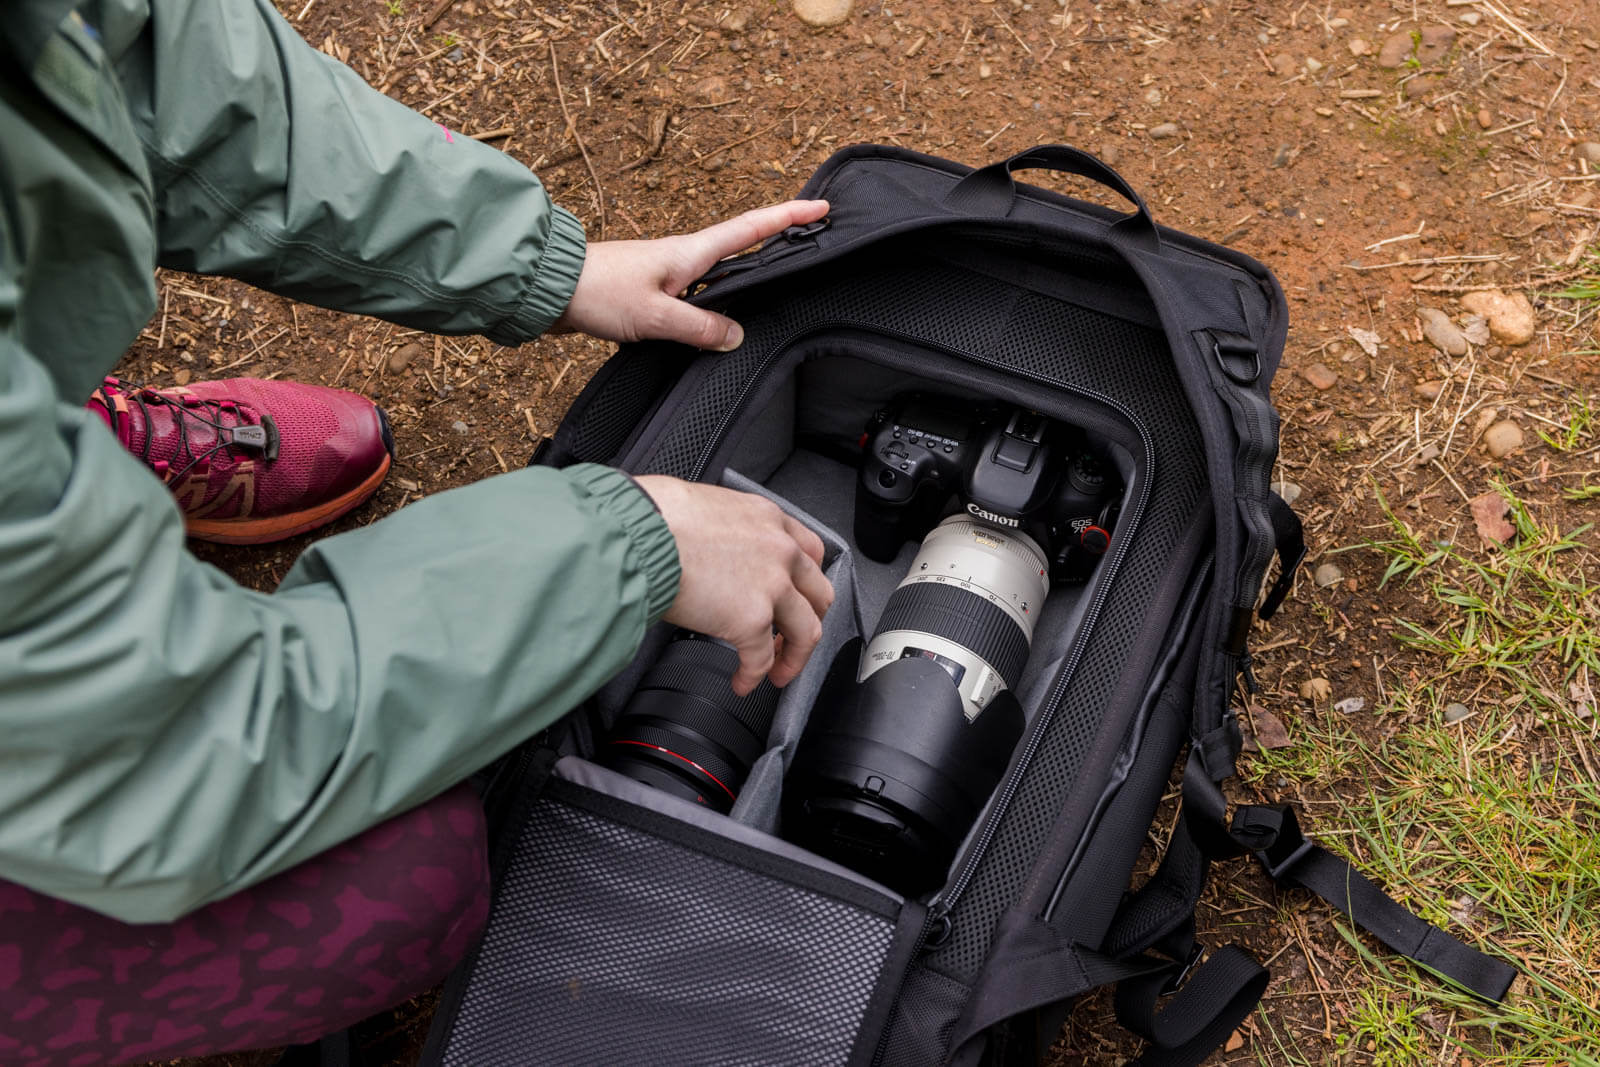 Versatility and comfort with Chrome's Niko Camera Backpack 3.0 